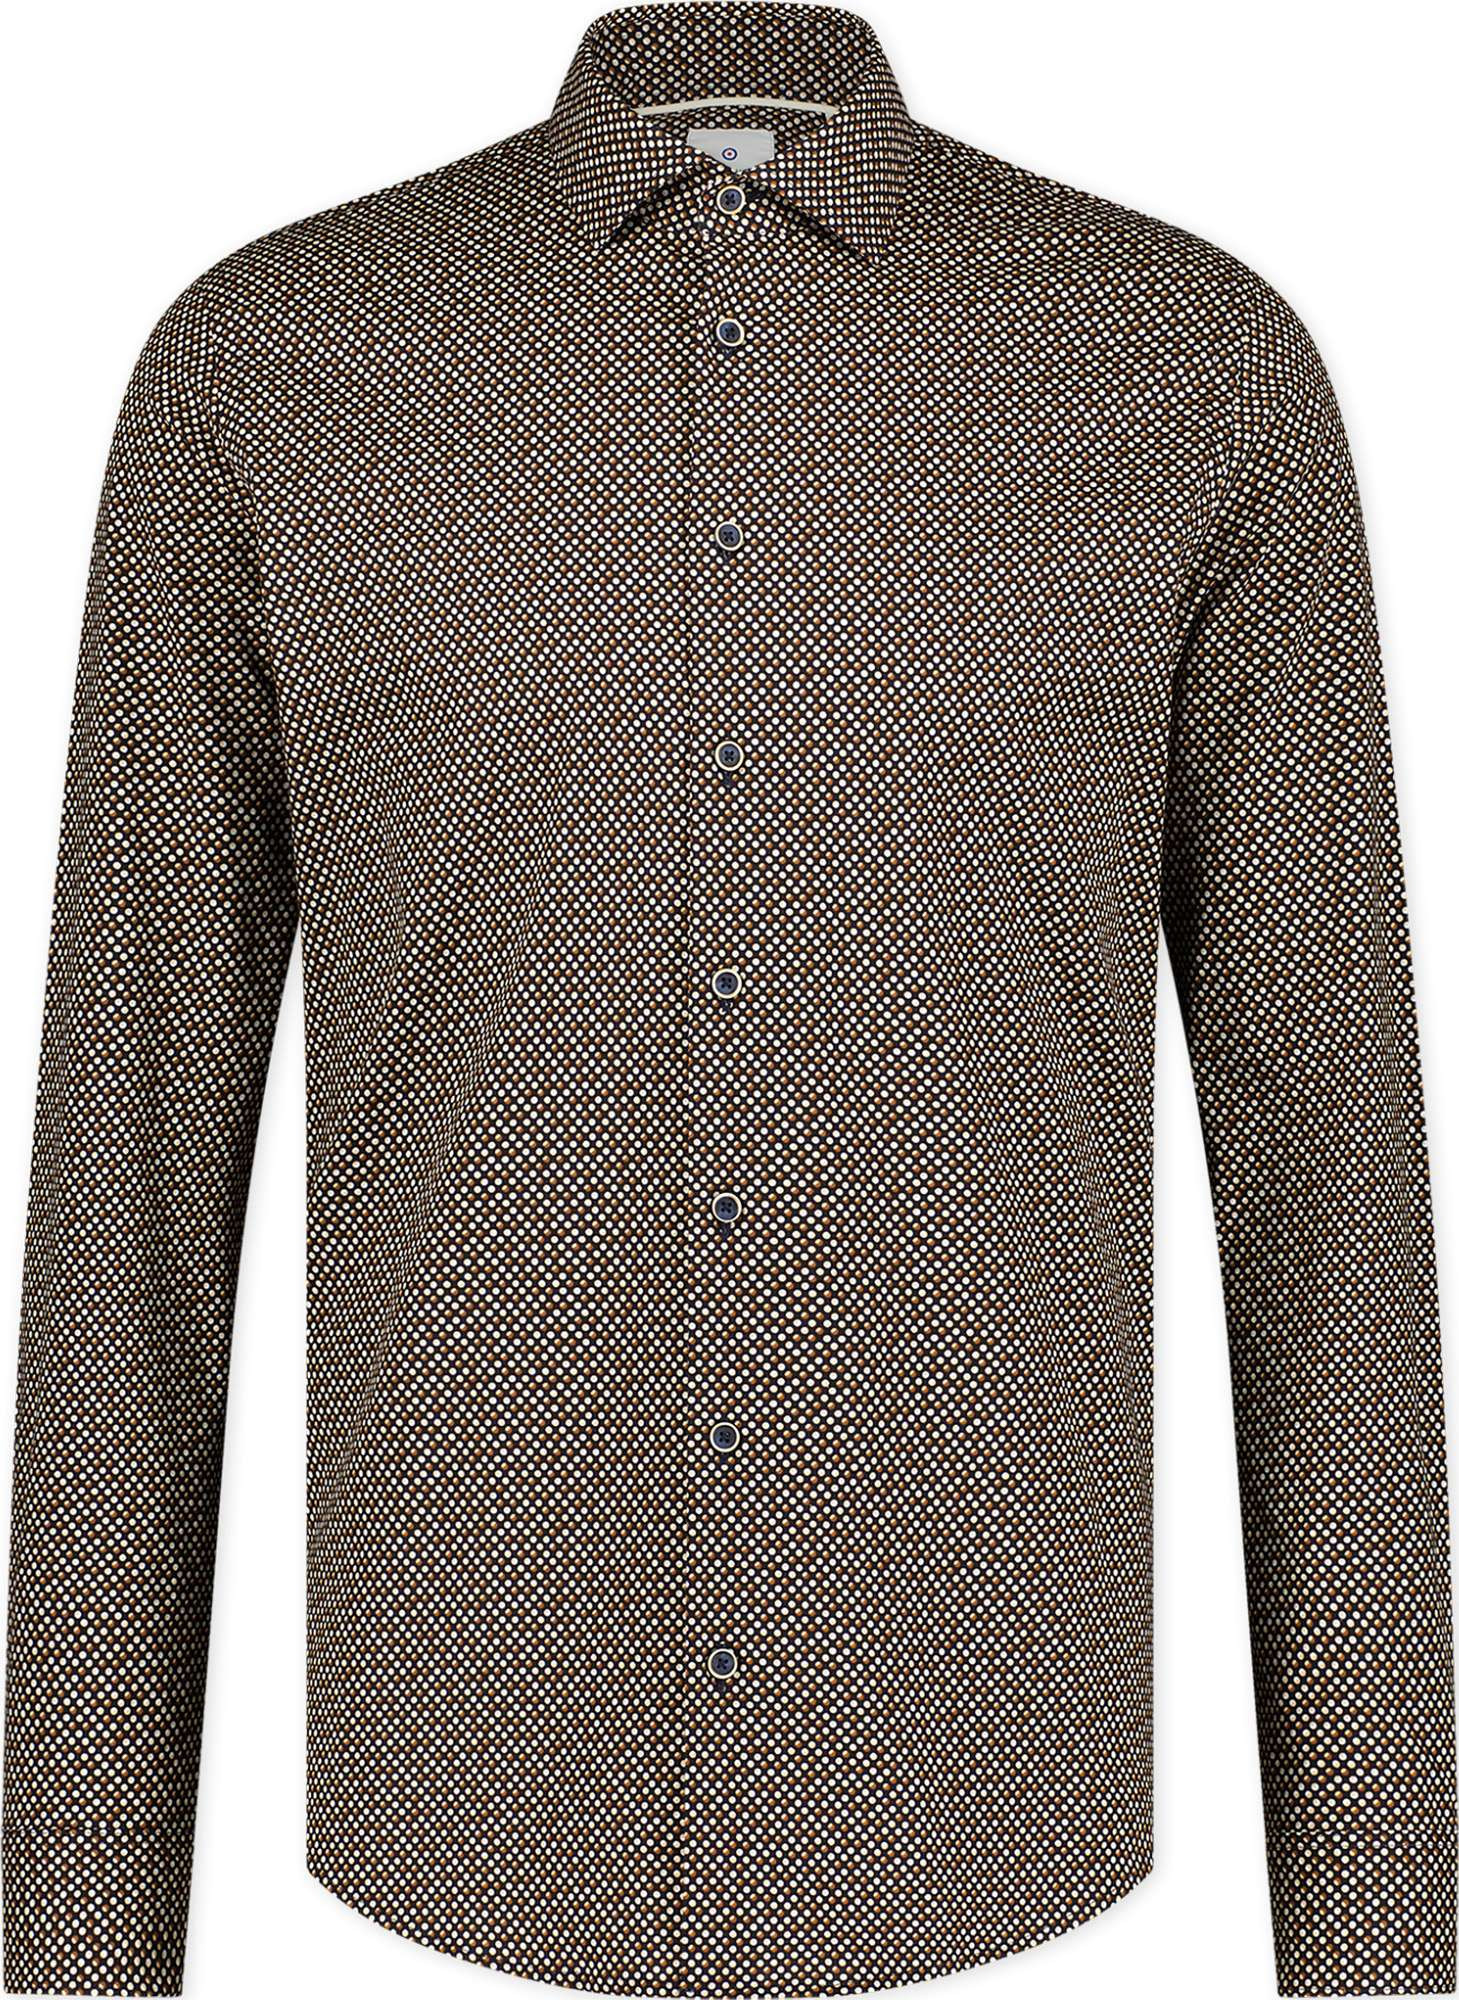 Afbeelding van Blue Industry 3115-32 black with brown & white dots dessin